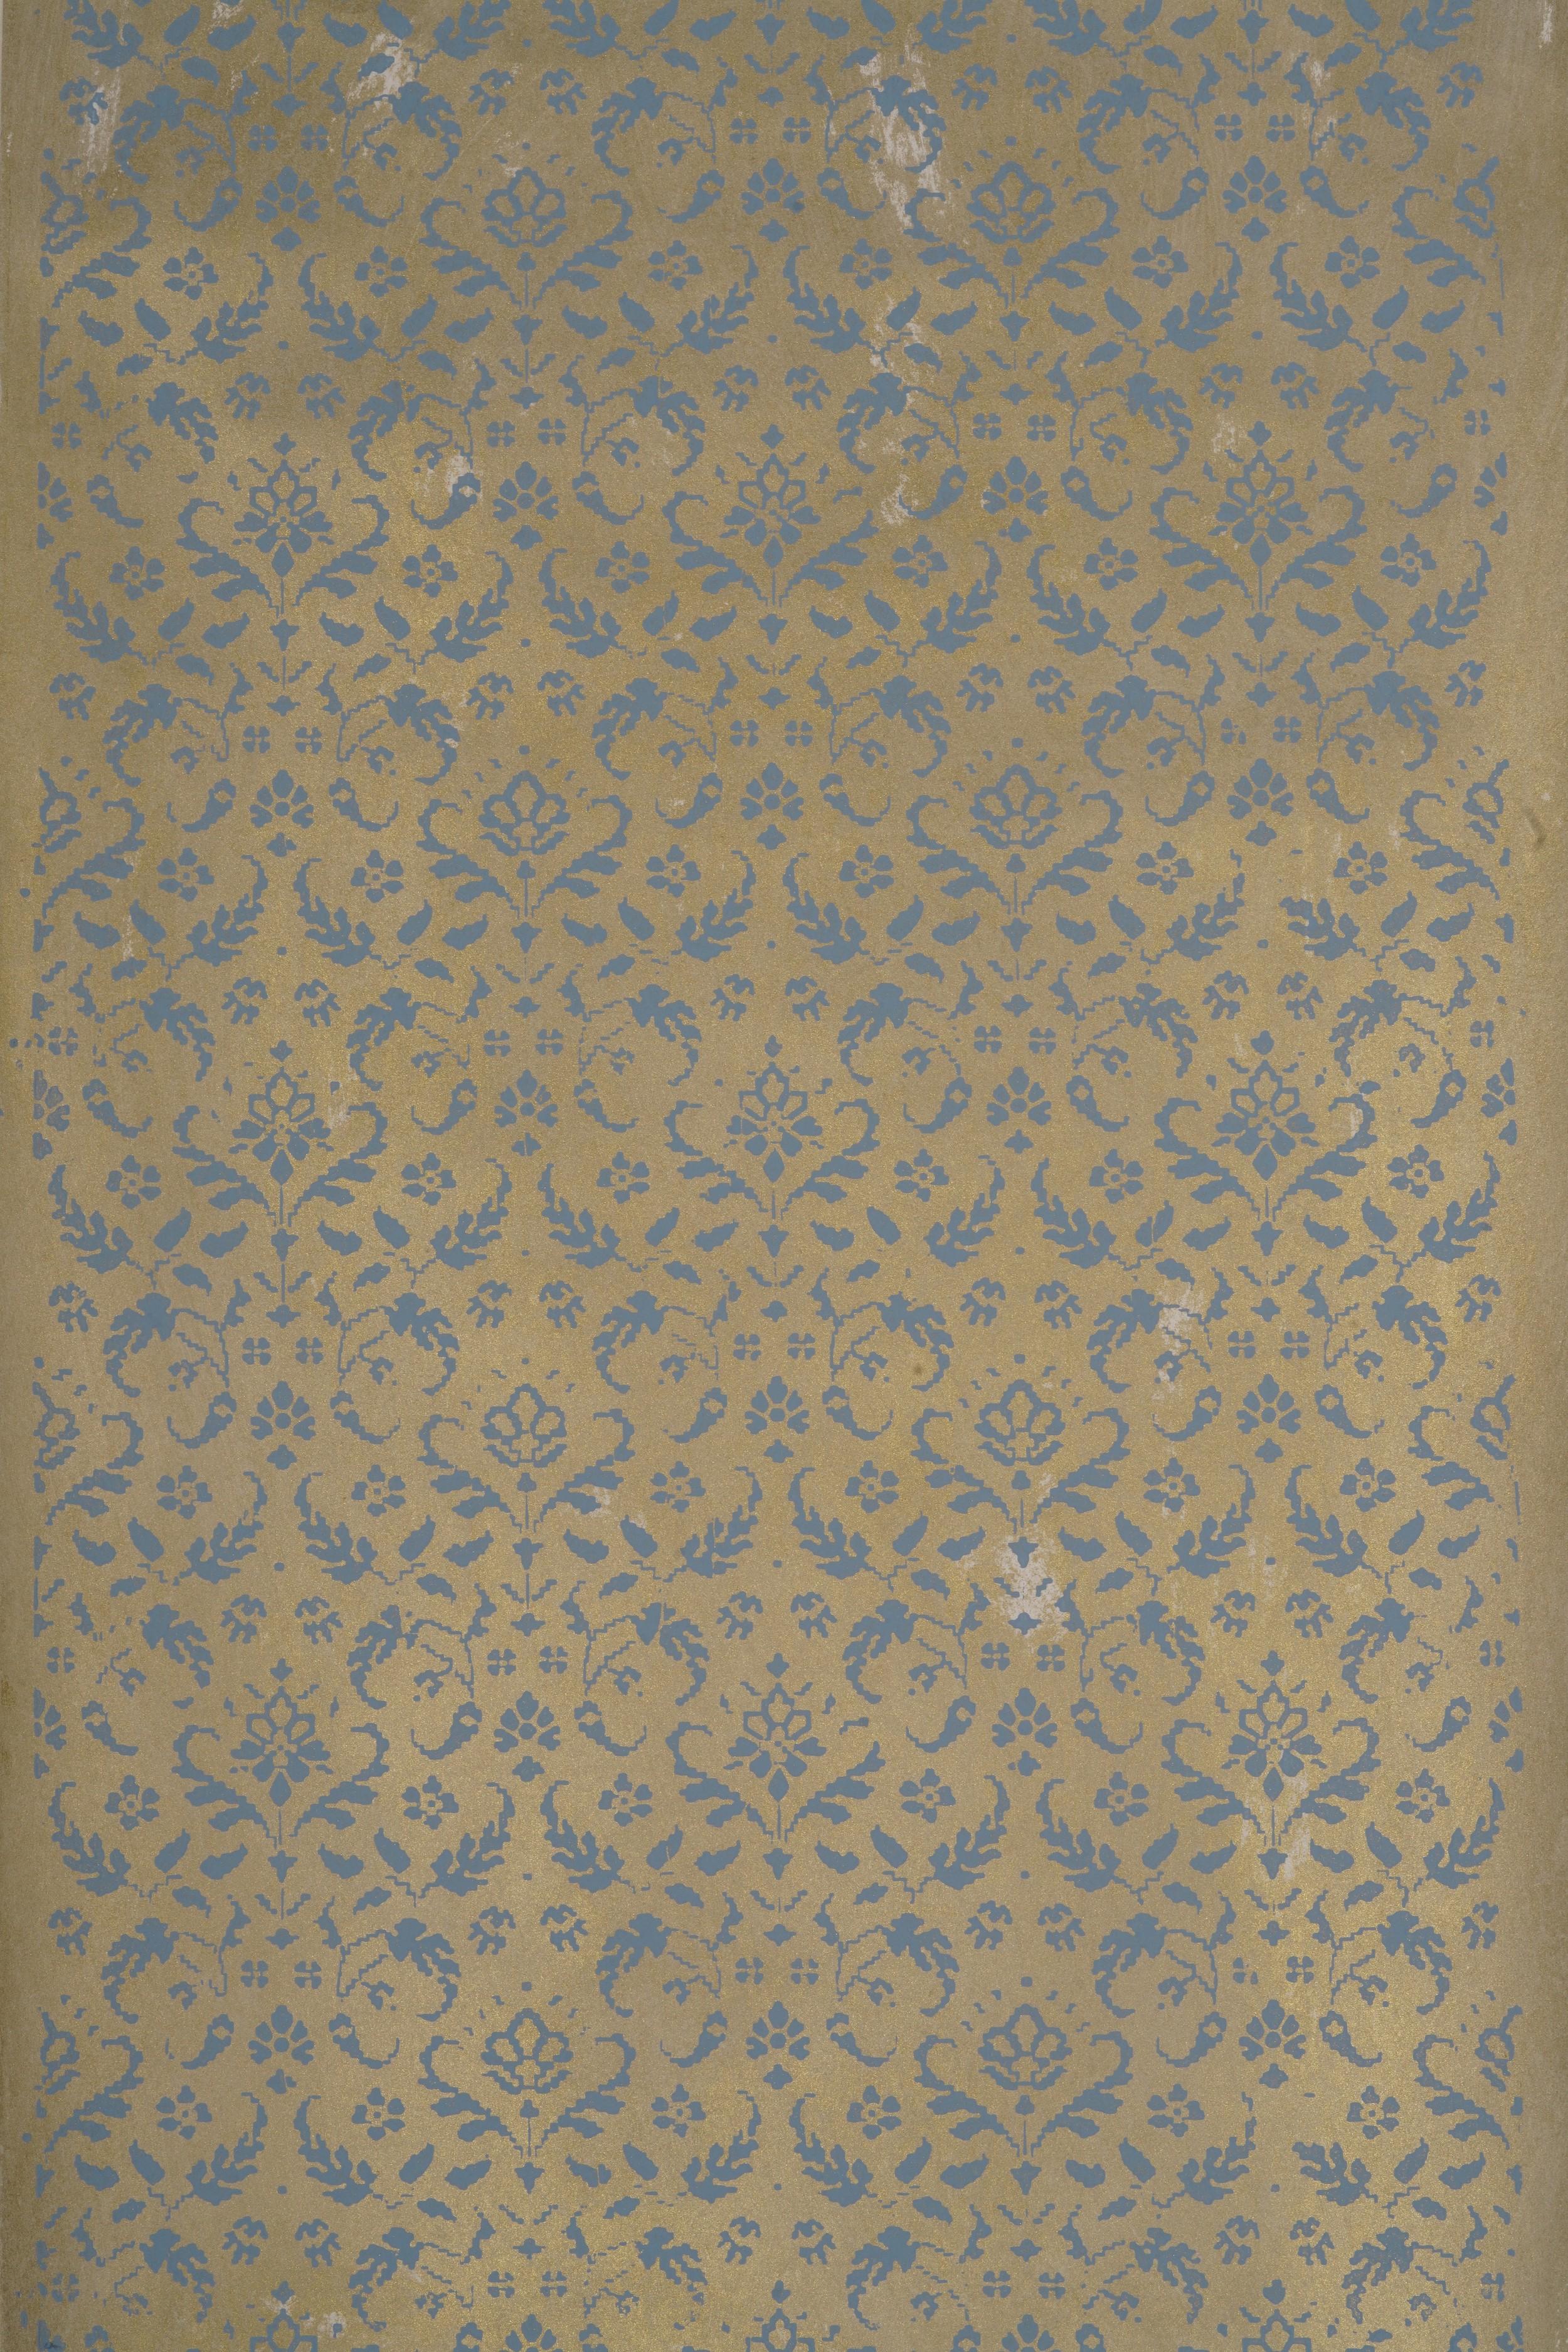 5 rolls of Gold on Blue Zuber wallpaper

Zuber & Cie
Rizheim, France; printed ca. 2006
Iridescent silk collection (Zuber reference no. 40019)

Approximate size: 393 x 18.5 inches per roll

5 rolls of Gold on Blue Zuber & Cie wallpaper from their